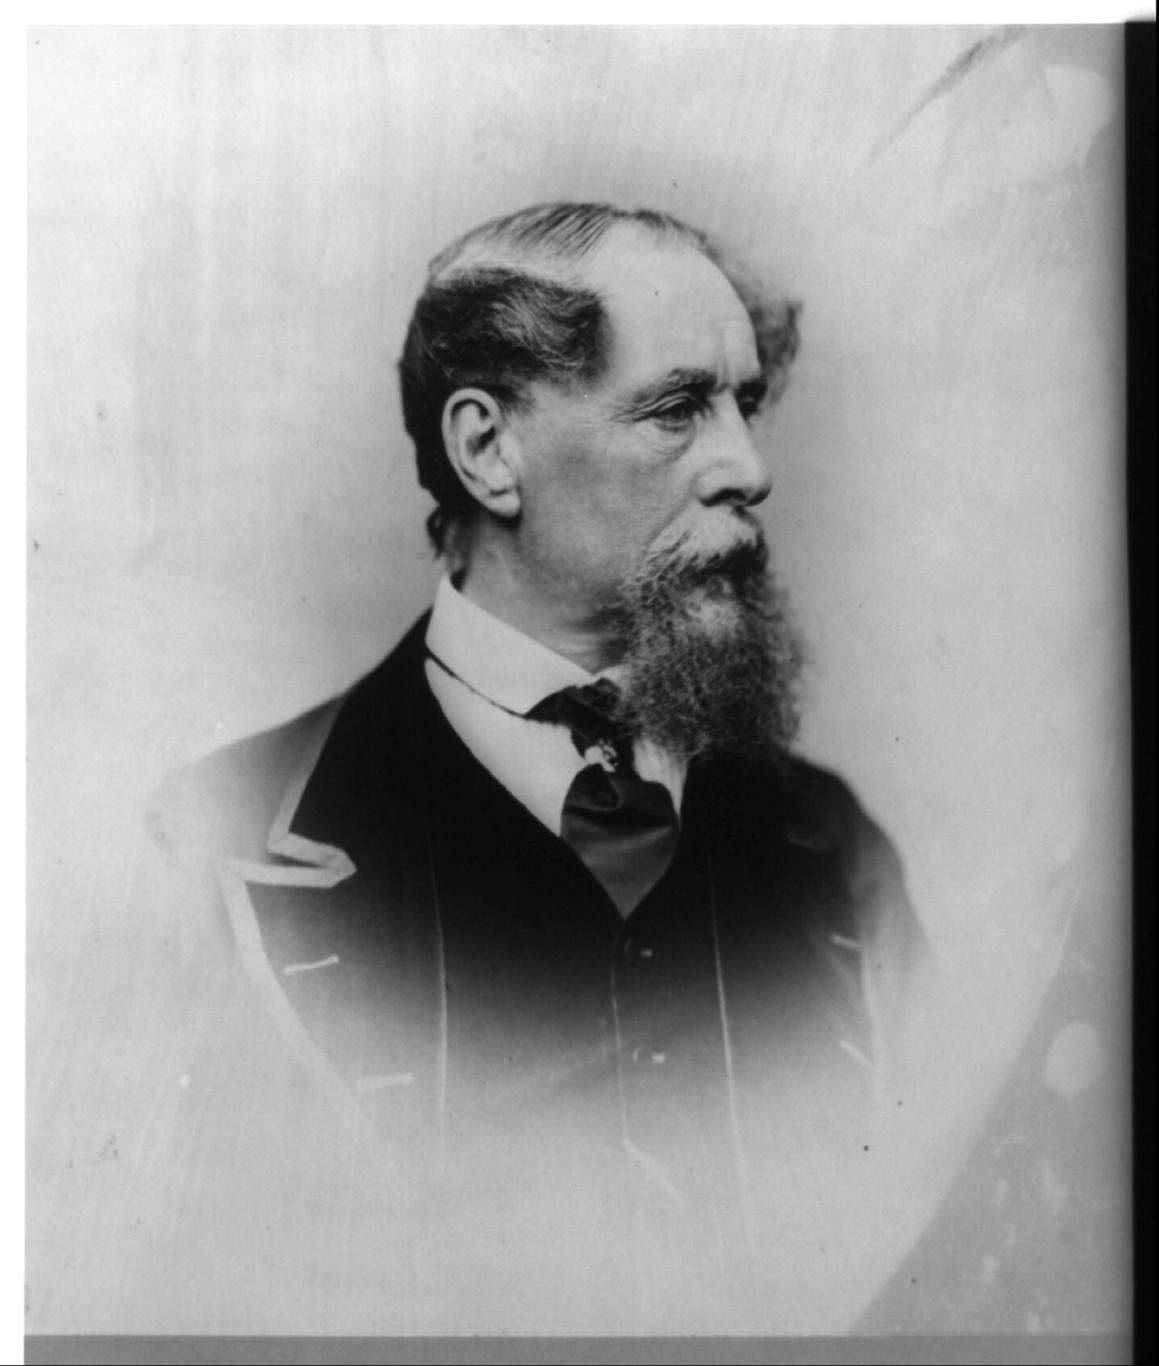 Portrait of a Victorian man from the Berg collection